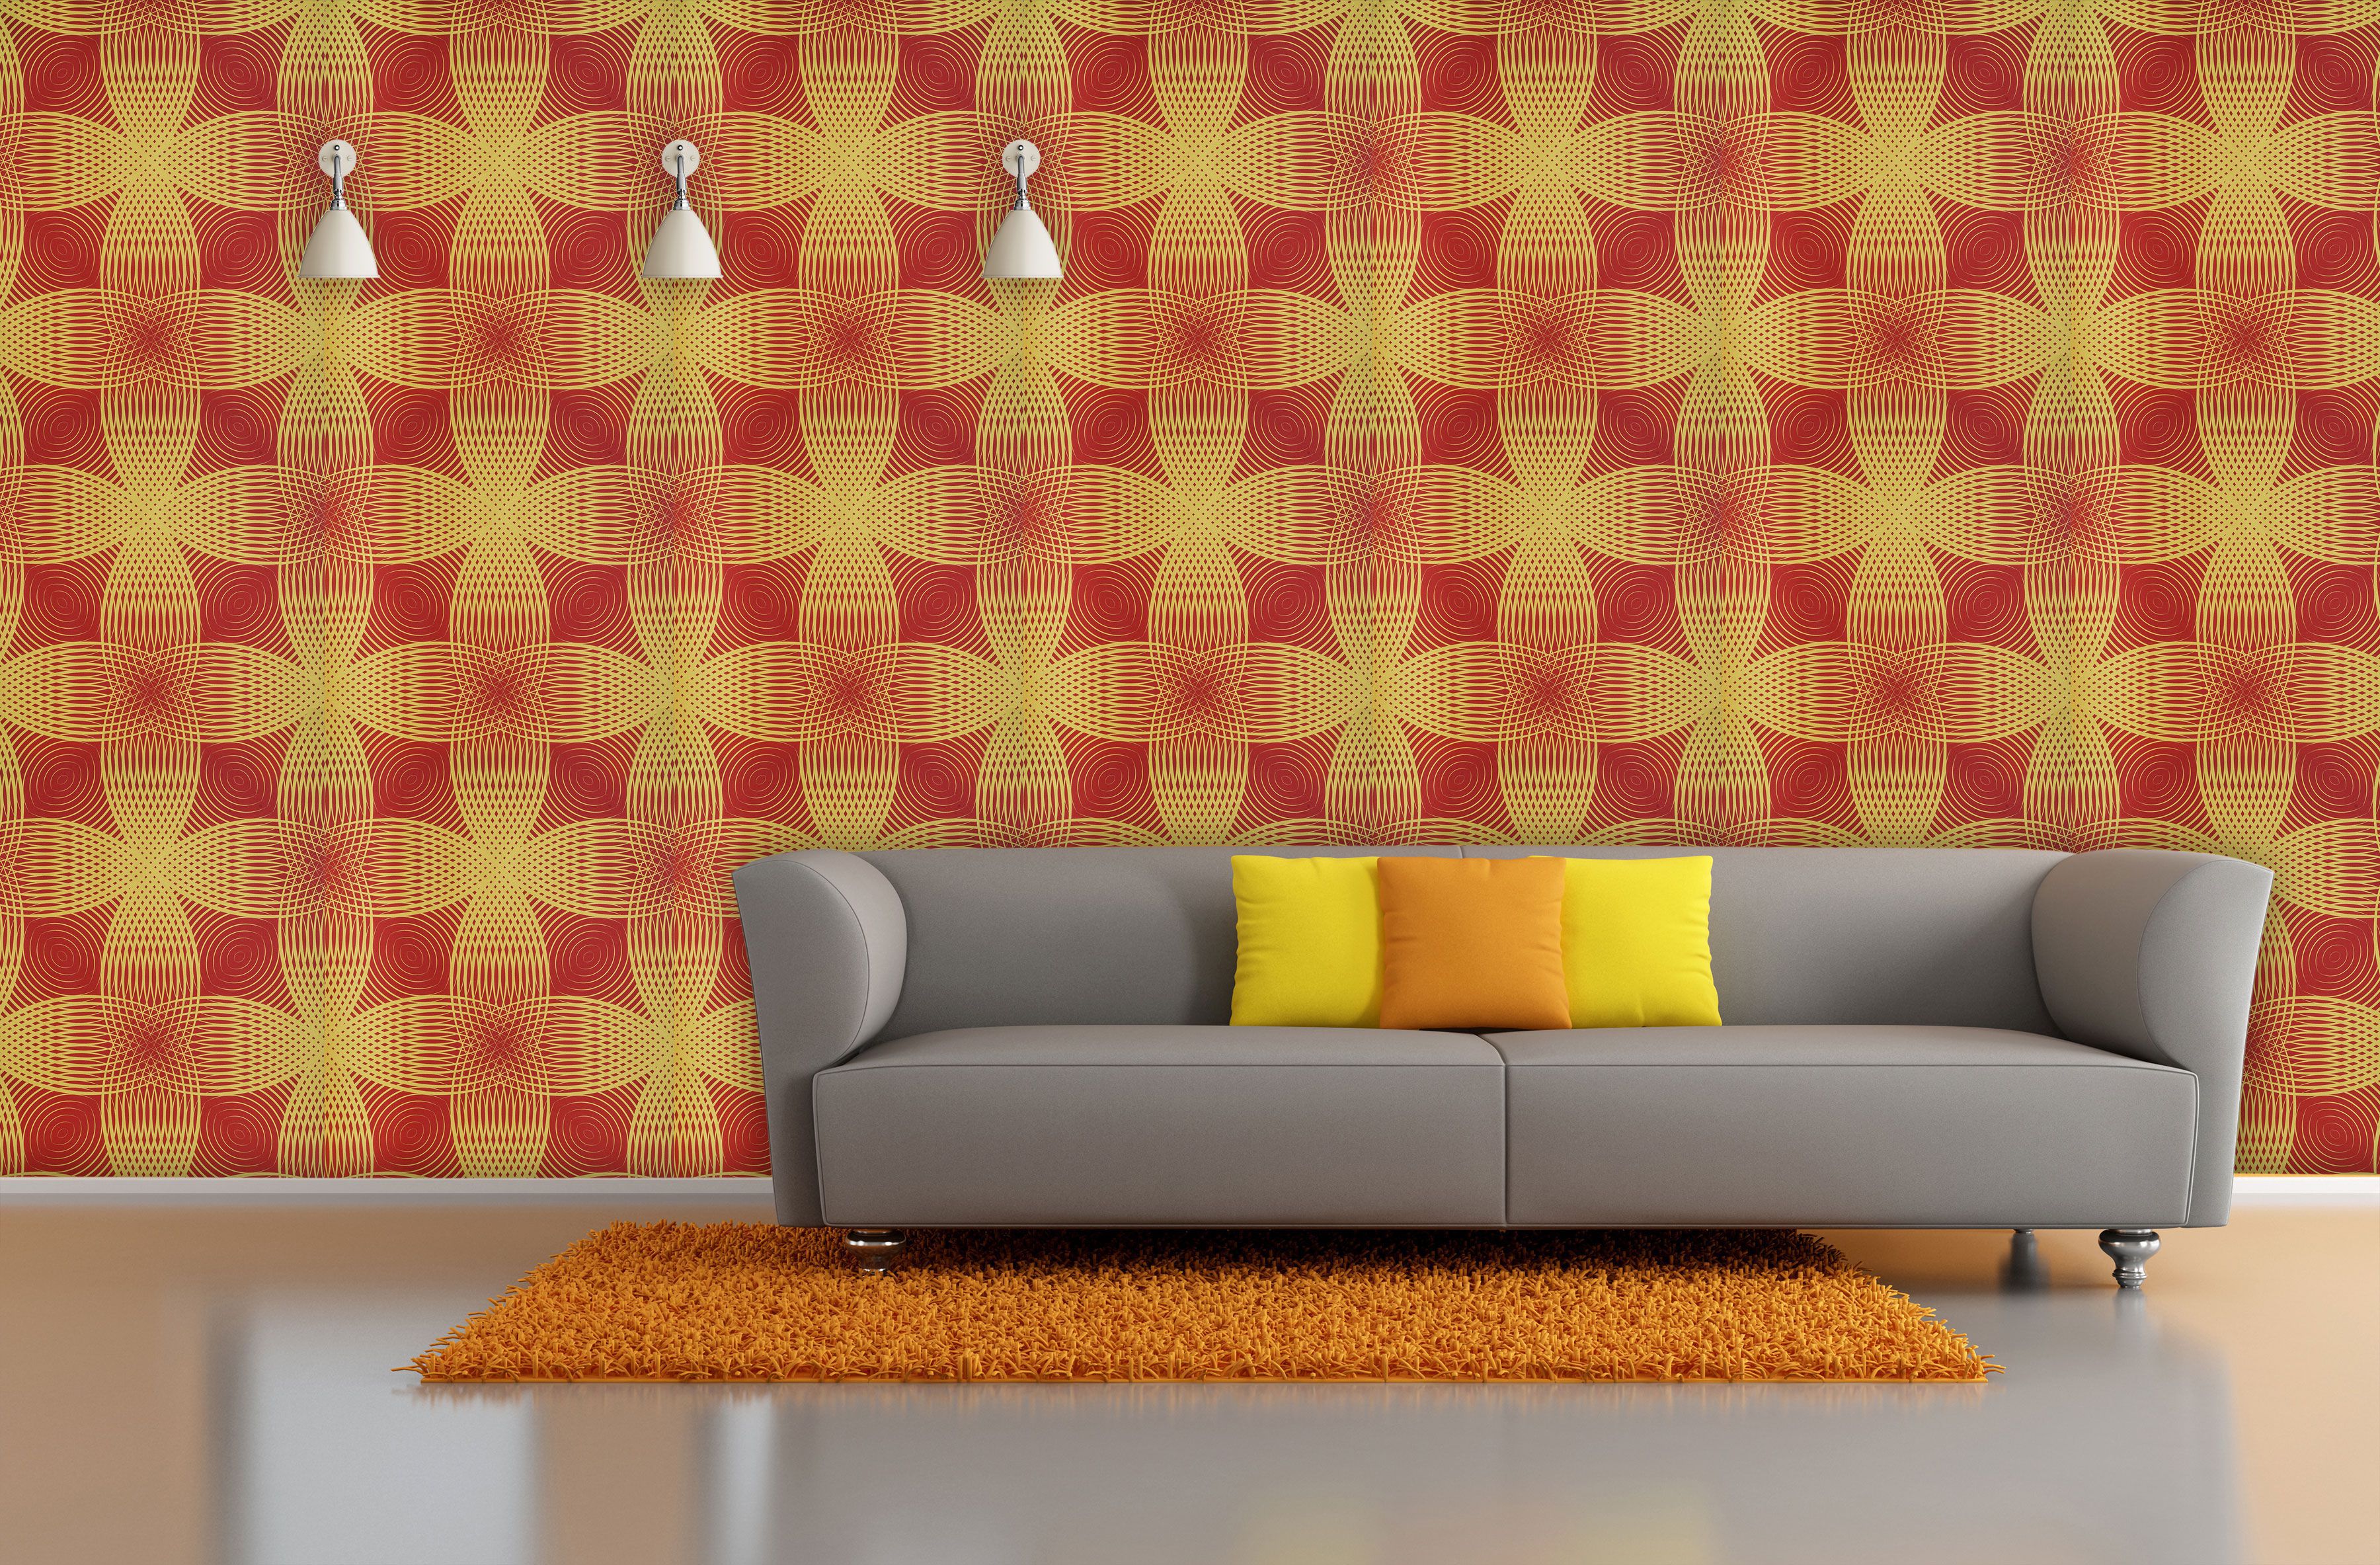 Paper Processers Imported Vinyl Coated Washable Wallpaper Covers  Approximately 50 Square. Feet.: Buy Paper Processers Imported Vinyl Coated  Washable Wallpaper Covers Approximately 50 Square. Feet. at Best Price in  India on Snapdeal